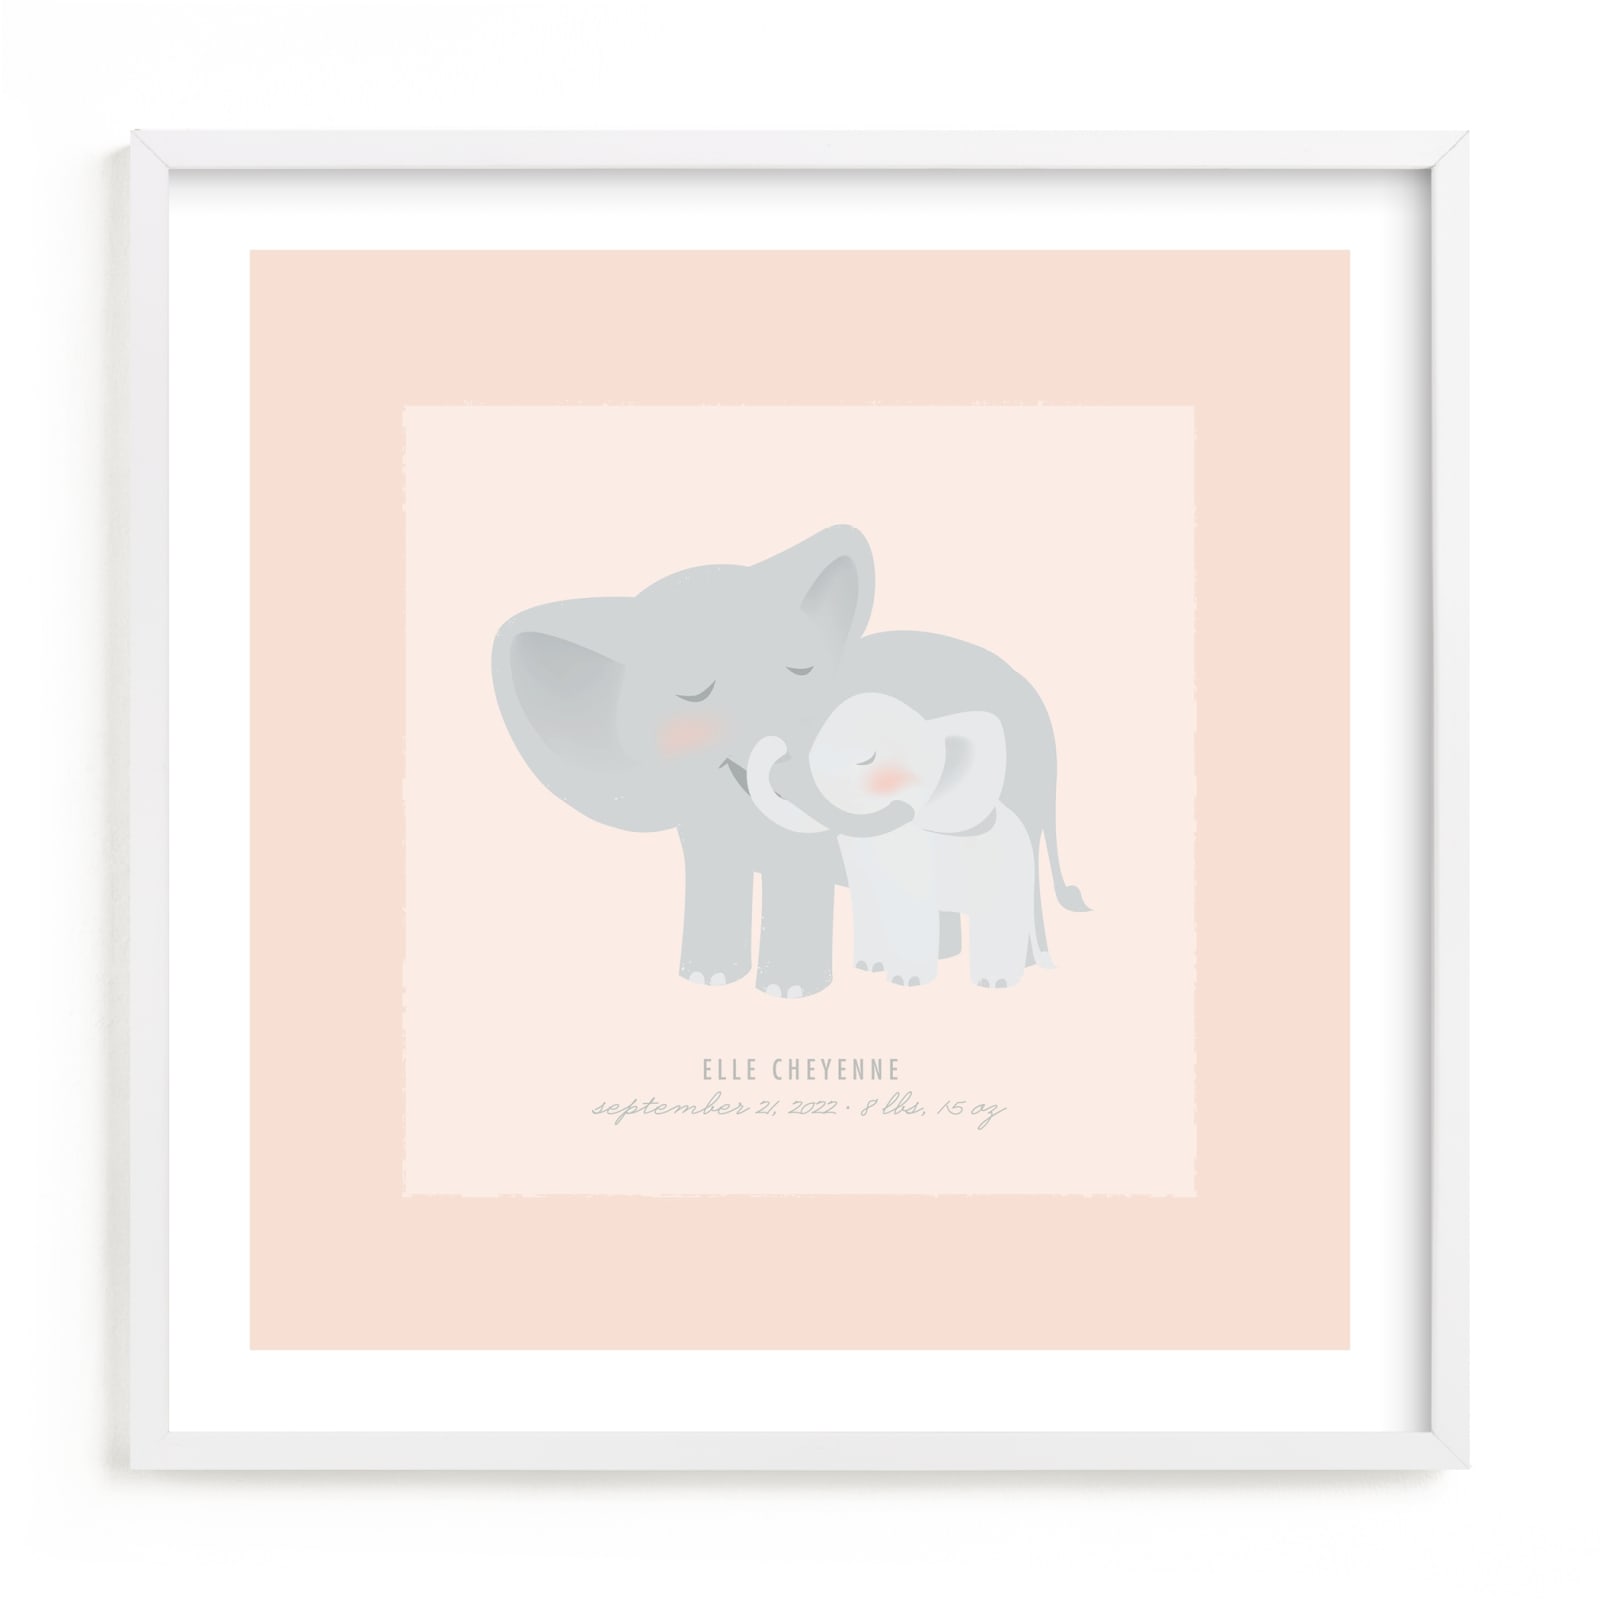 This is a pink nursery wall art by Lori Wemple called A Mother's Love - Elephants.